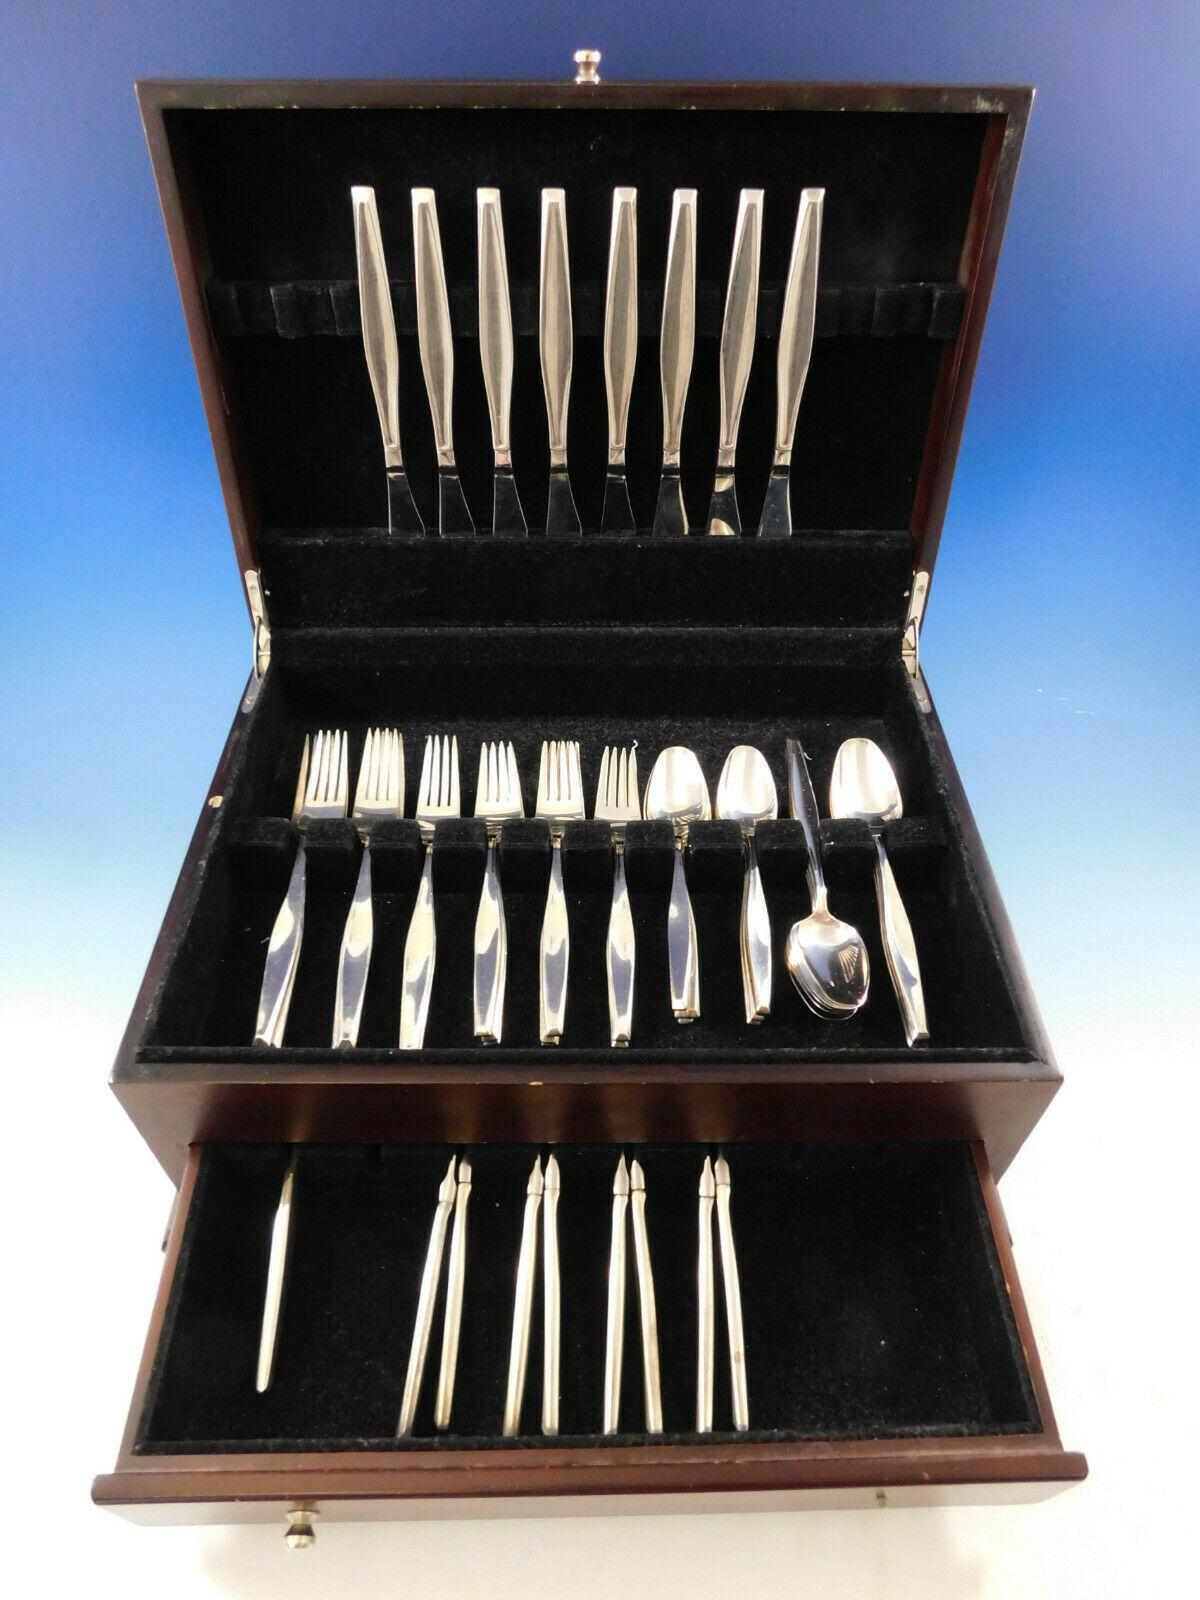 Classique by Gorham Sterling Silver flatware set of 49 pieces. This set includes:

8 knives, 9